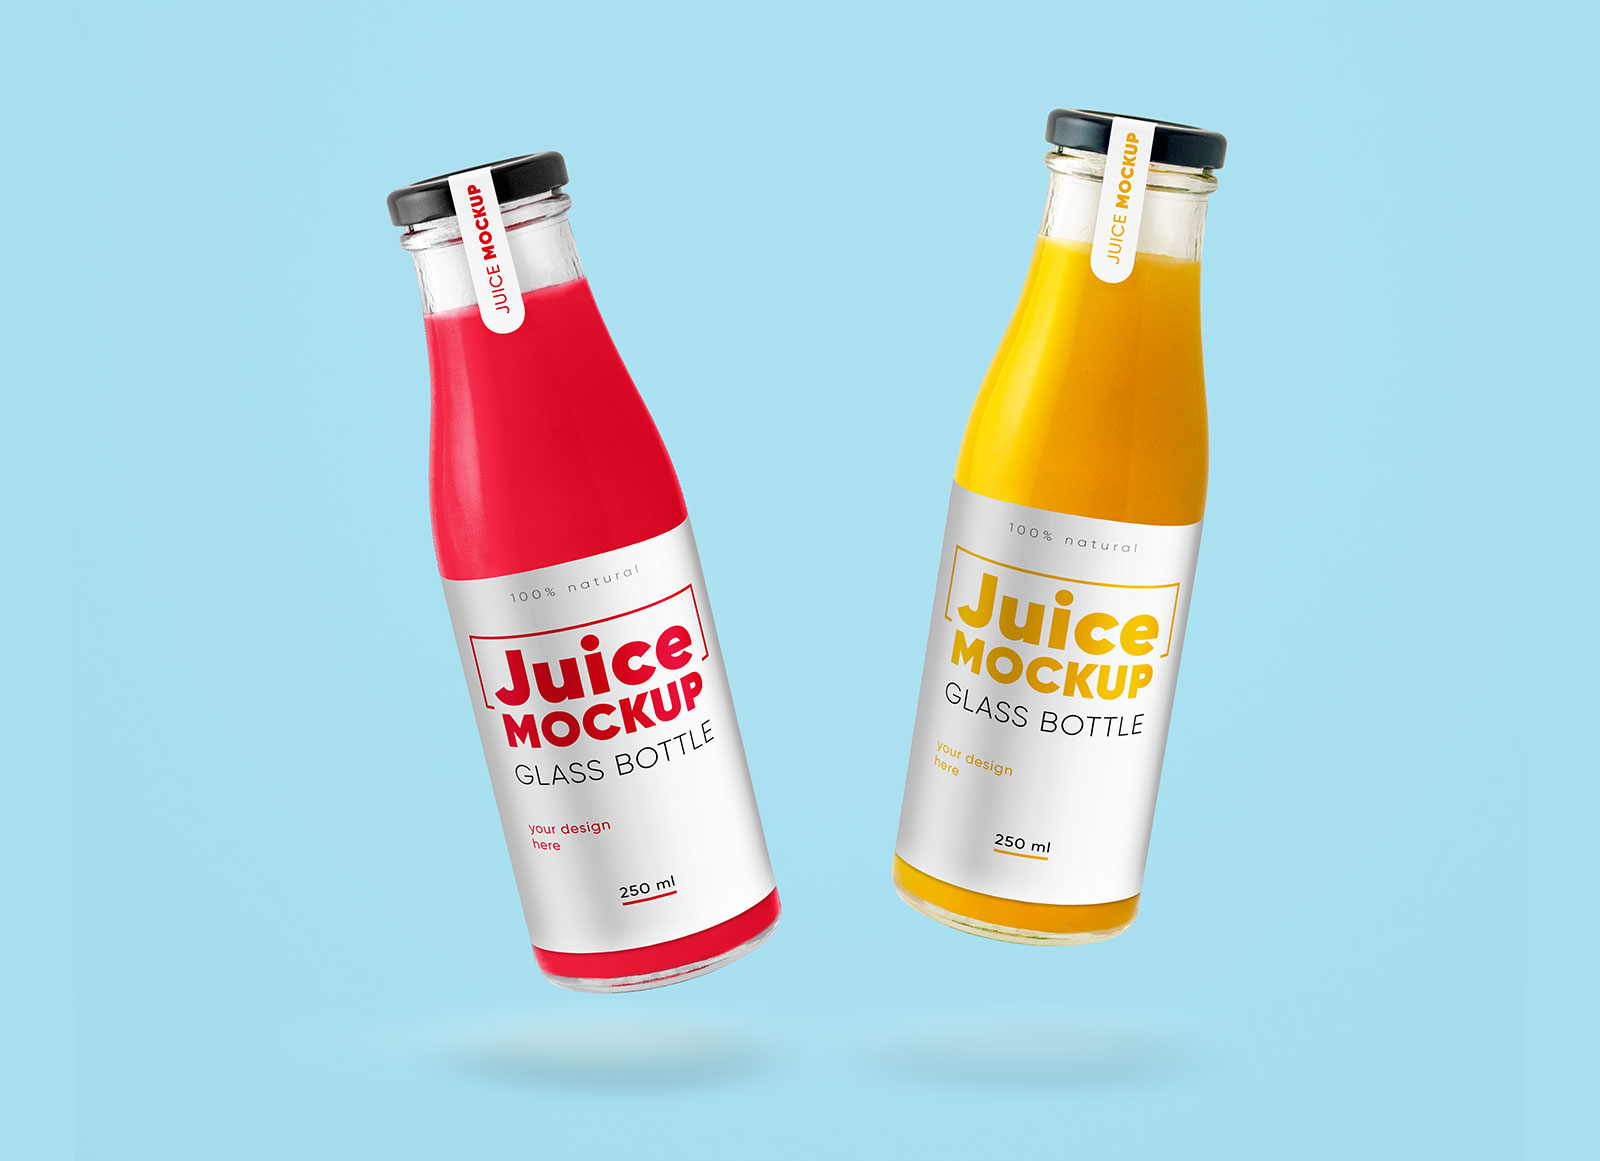 Download 50+ Awesome Juice Packaging PSD Mockup Templates ...